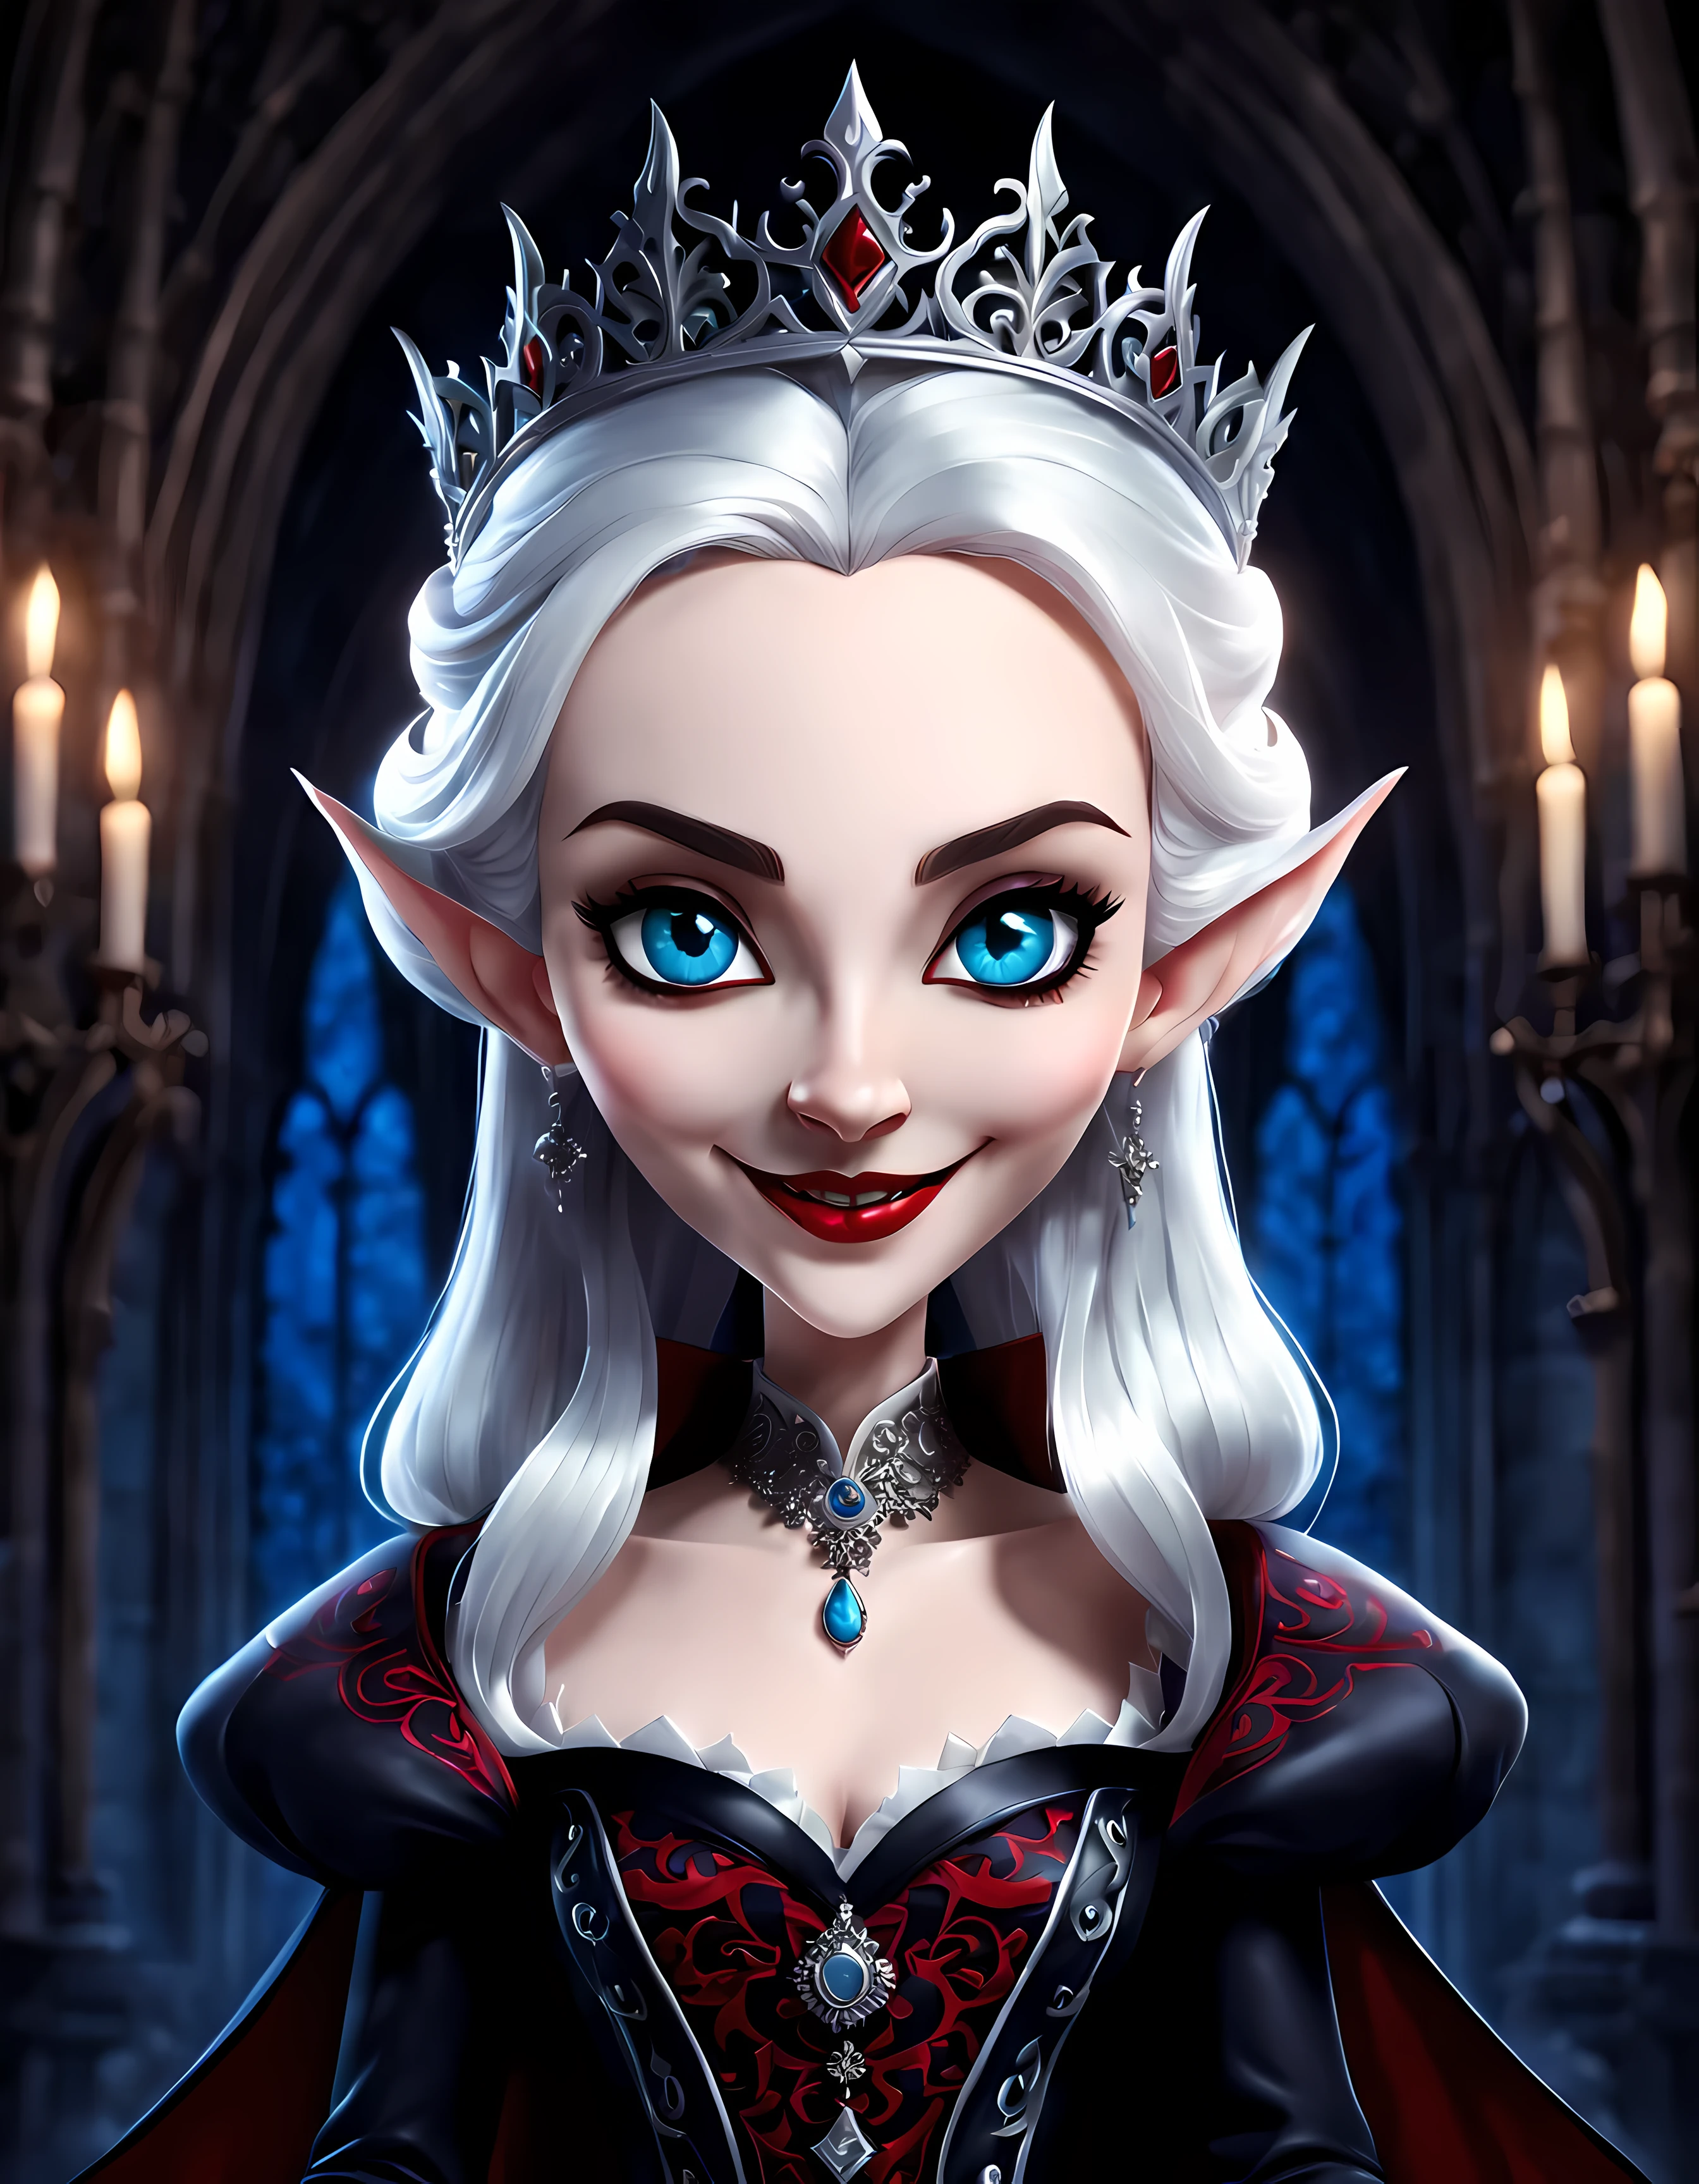 Cute Cartoon, CuteCartoonAF. | Masterpiece in maximum 16K resolution. | (Cute cartoon style). | Symmetrical front view of an adorable vampire queen in a long noble gown with rich complex gothic patterns on it. | (((Soft smile, looking at the viewer))), vivid blue eyes. | Flowing white hair, pointy ears. | Simple dark background. | More_Detail